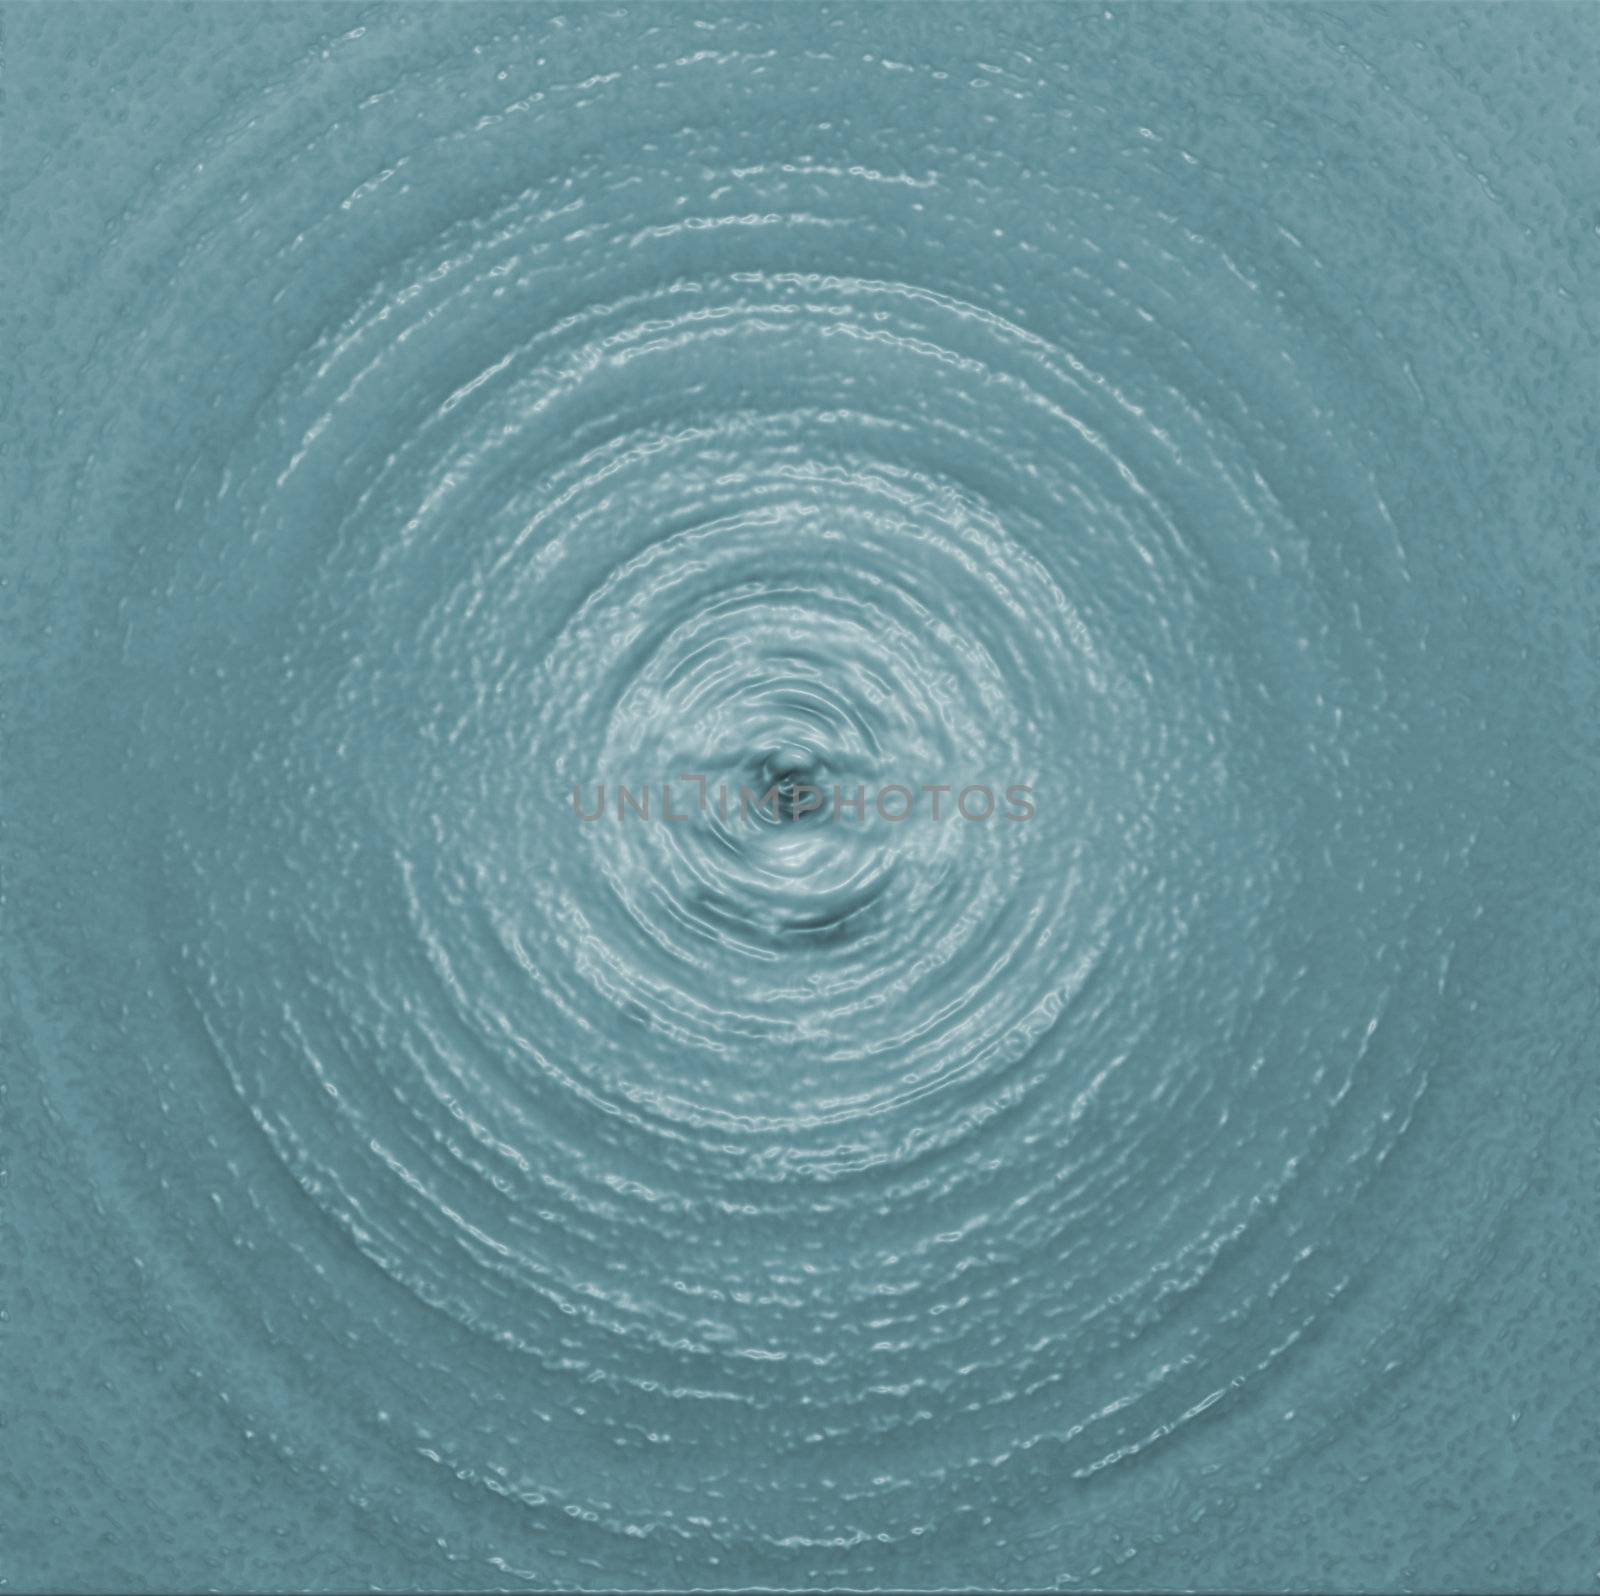 Water ripples background image.